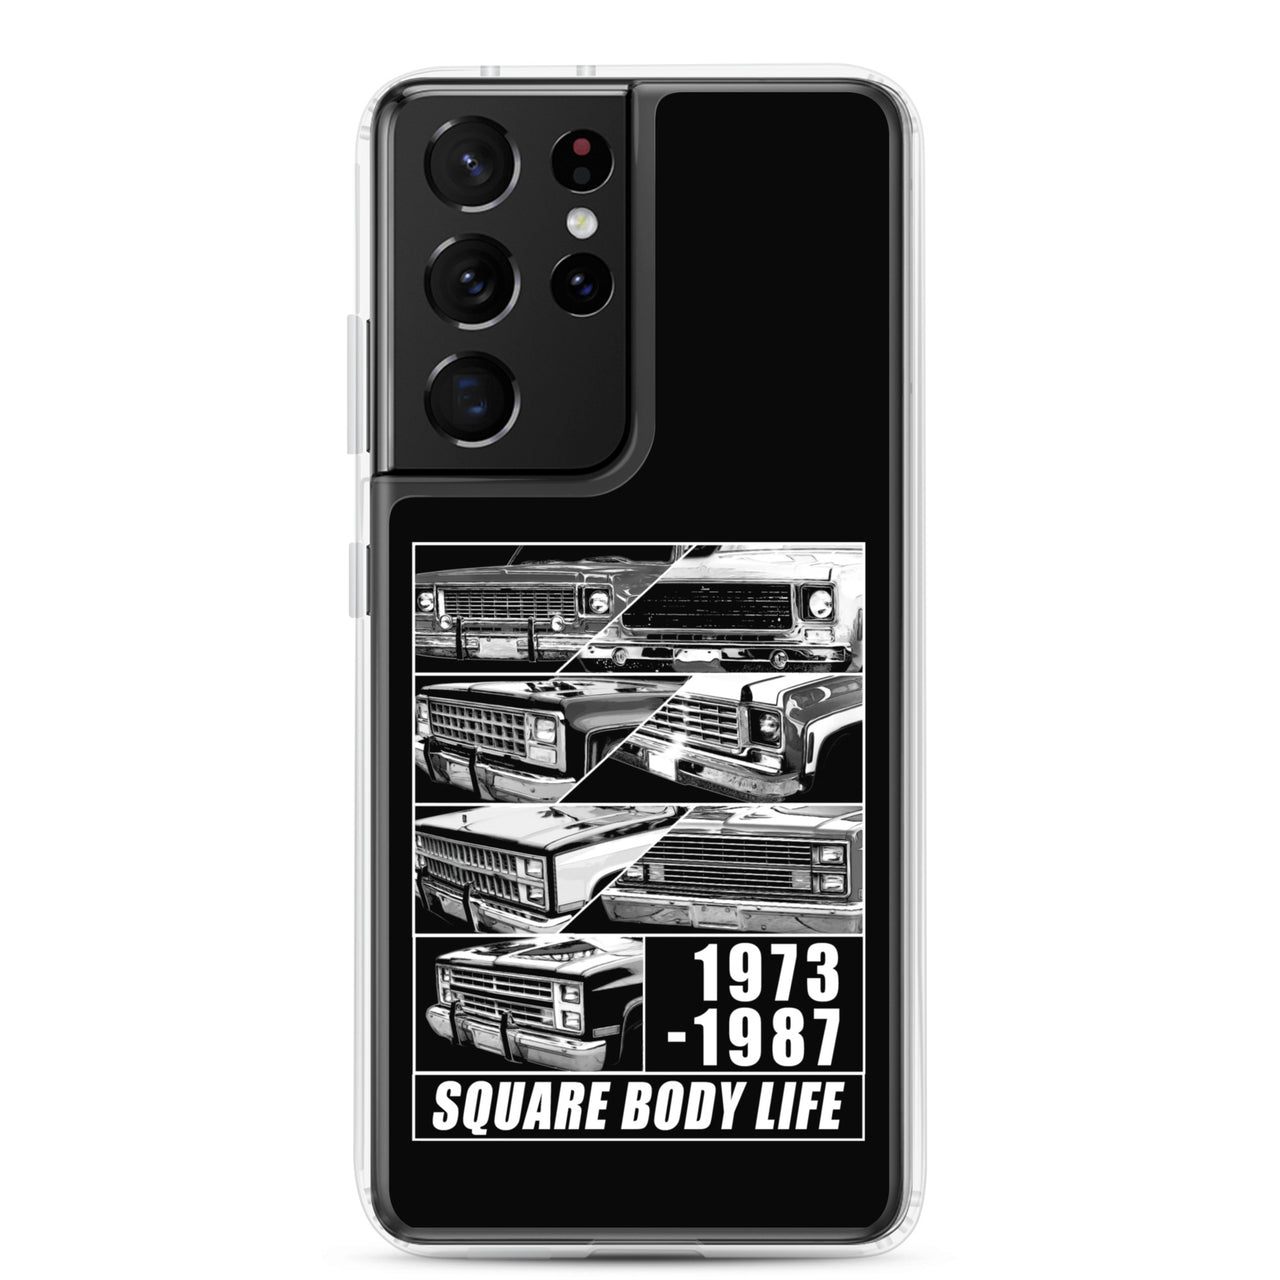 Squarebody Truck Samsung Phone Case For S21 Ultra